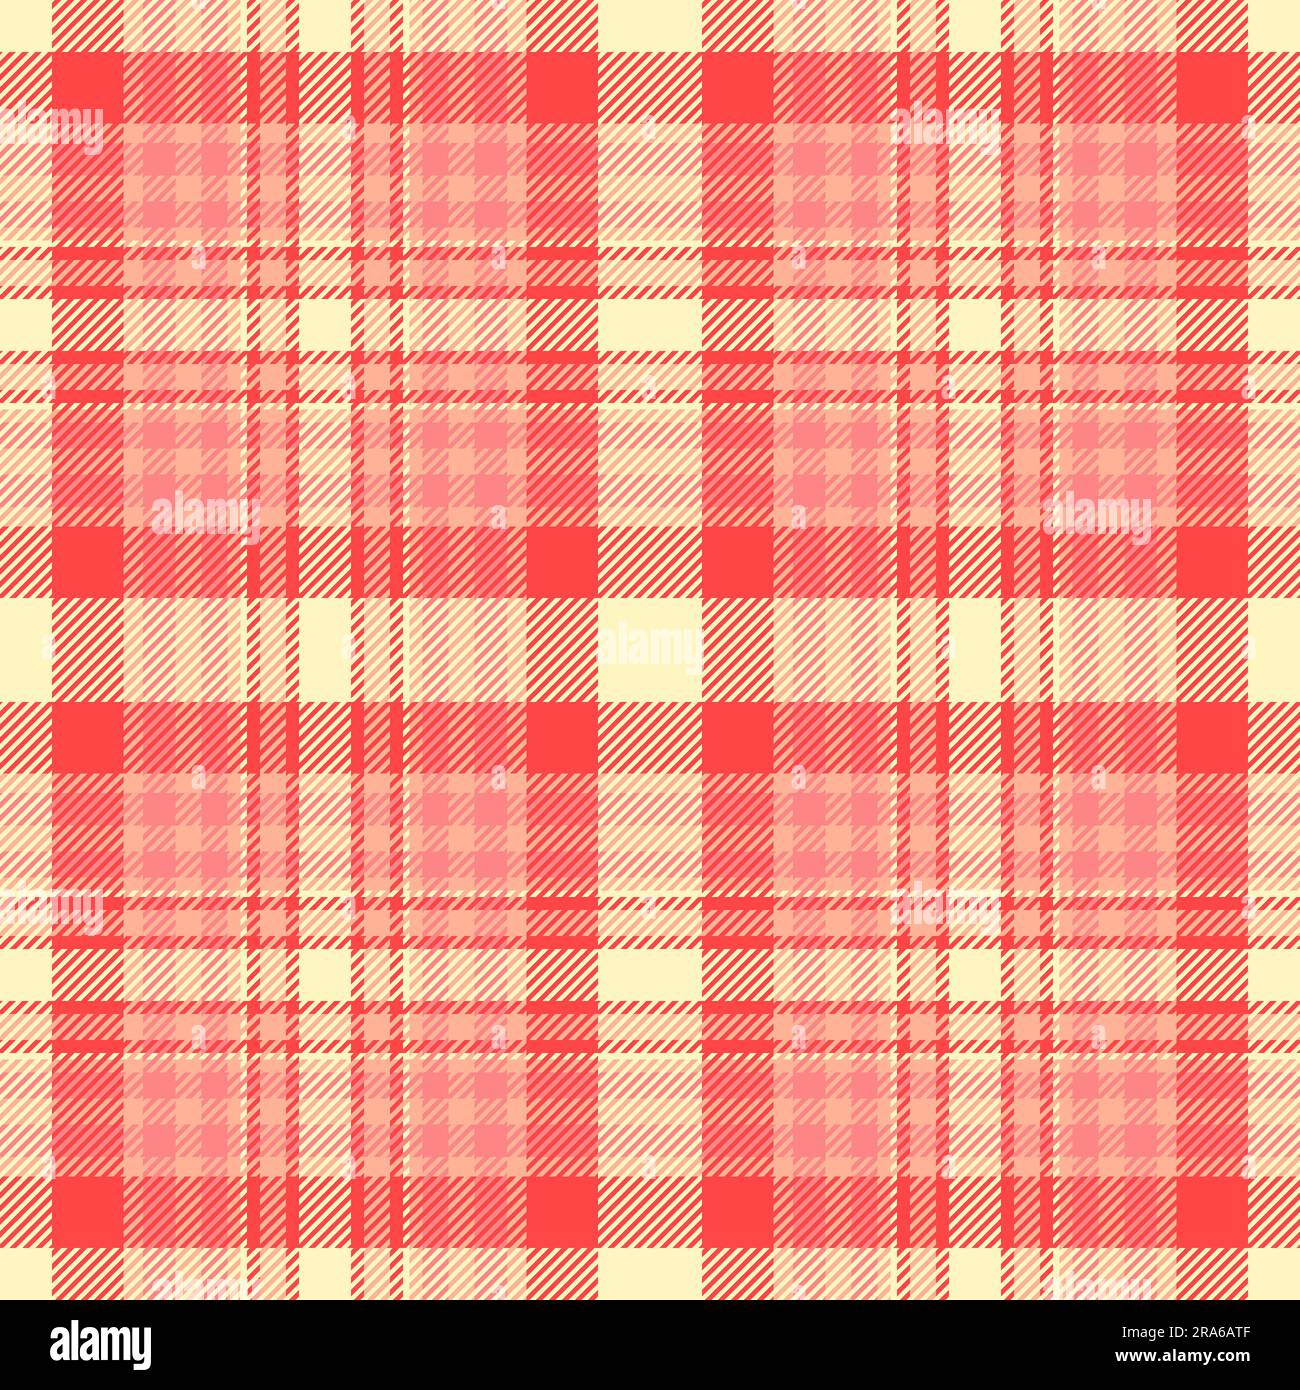 Seamless background vector of texture plaid tartan with a pattern check fabric textile in red and orange colors. Stock Vector